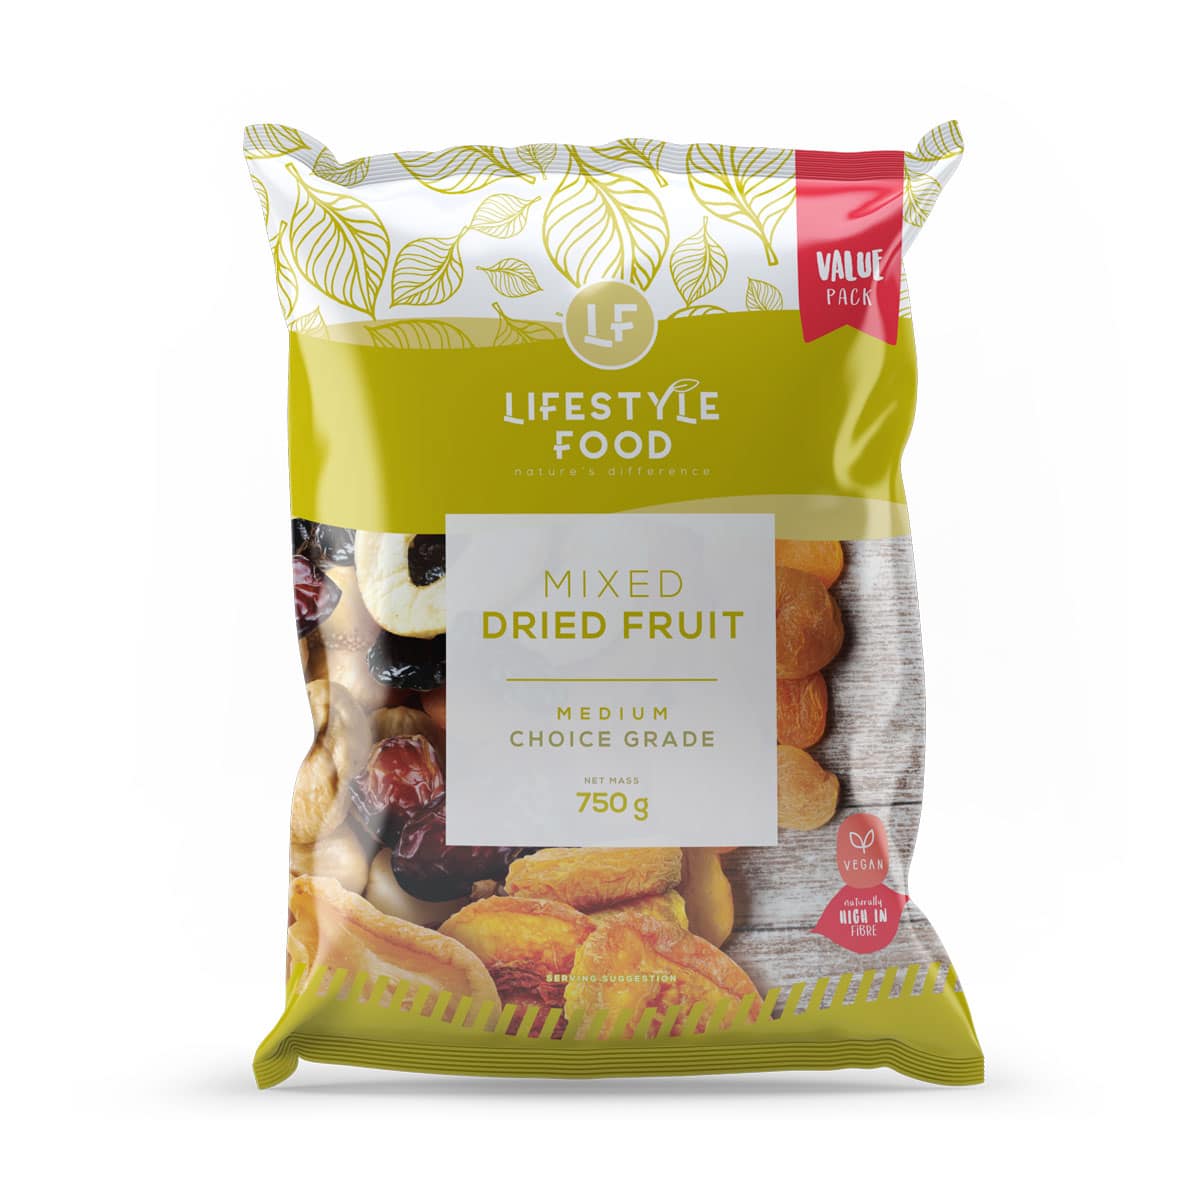 Lifestyle Food Mixed Dried Fruit Value Pack - 750g